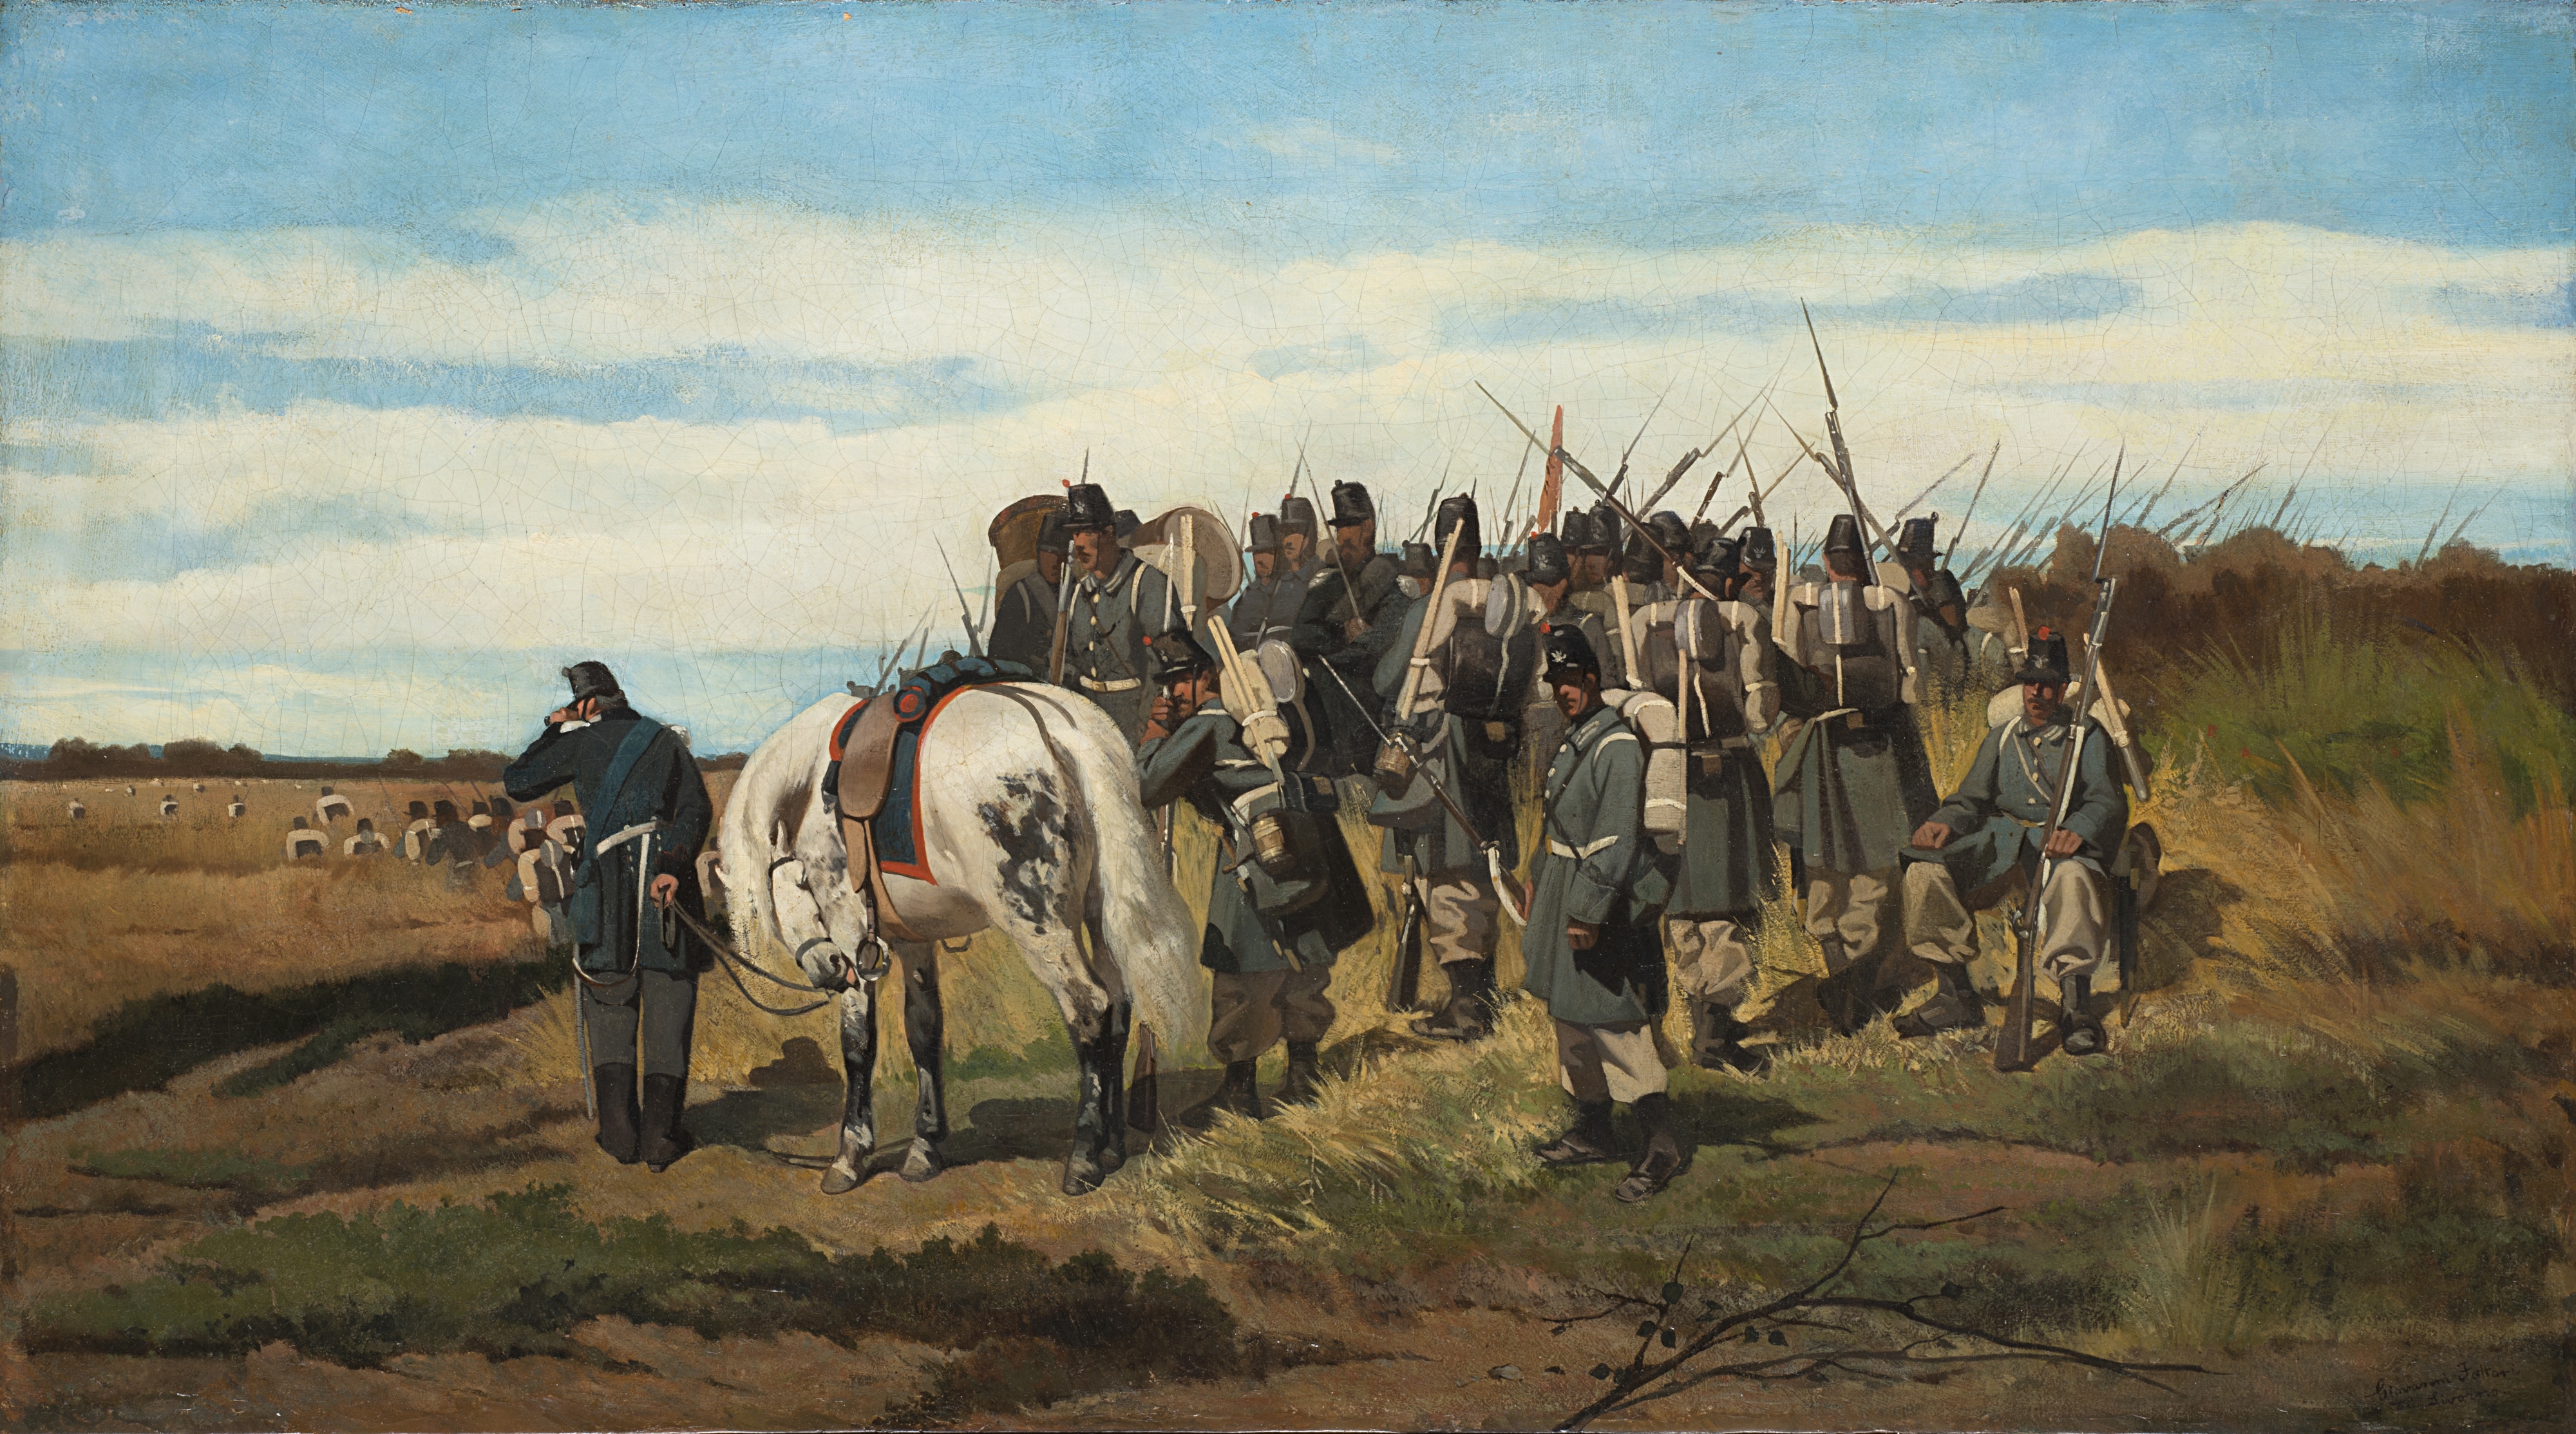 In reconnaissance / Infantry in park by Giovanni Fattori, 1856